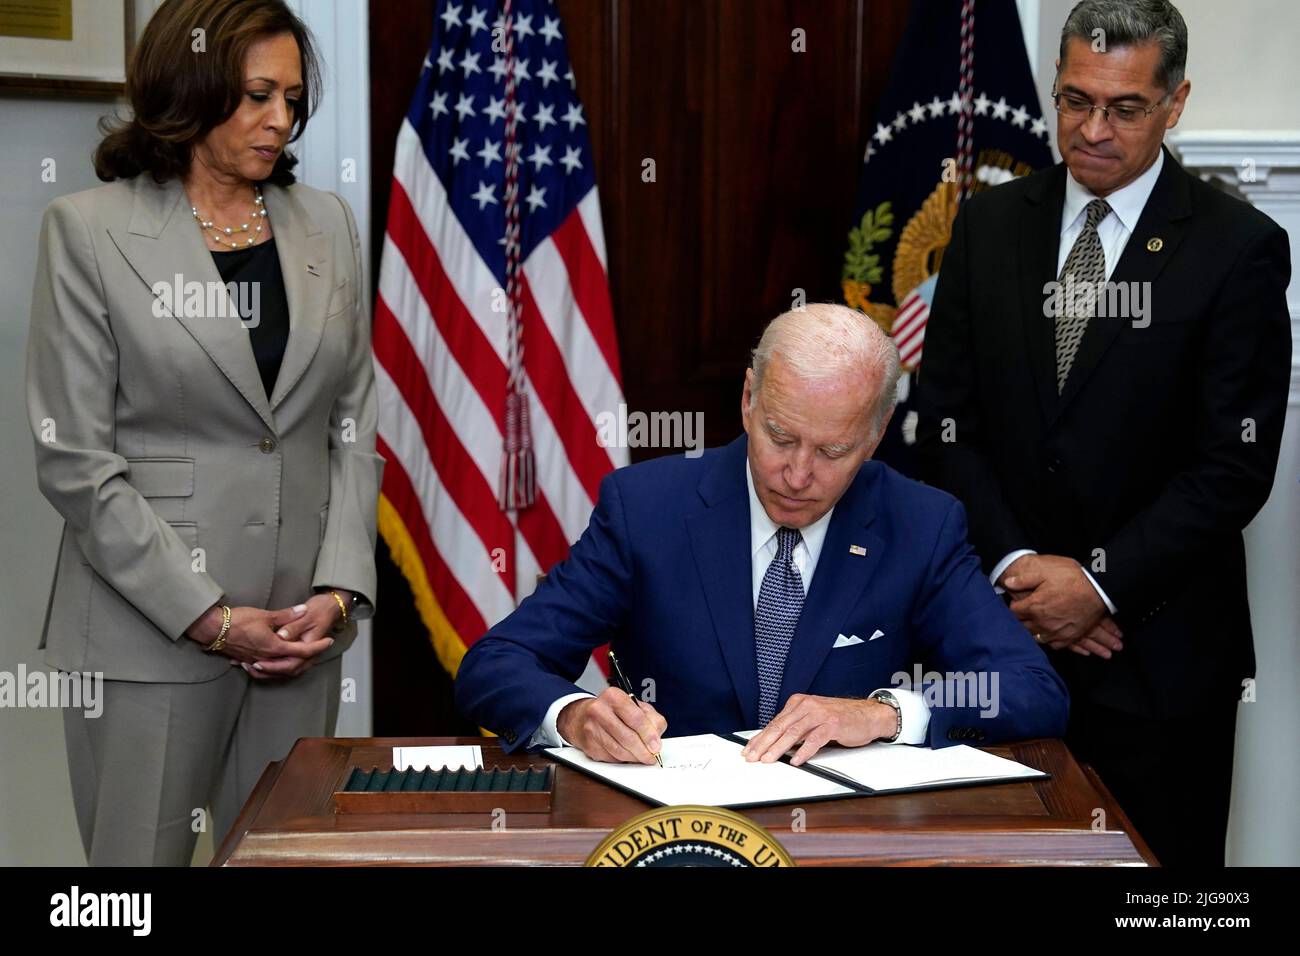 United States President Joe Biden with Vice President Kamala Harris and Health and Human Services Secretary Xavier Becerra signs the executive order on access to reproductive health care services in the Roosevelt Room at the White House in Washington on July 8, 2022. Credit: Yuri Gripas/Pool via CNP /MediaPunch Stock Photo